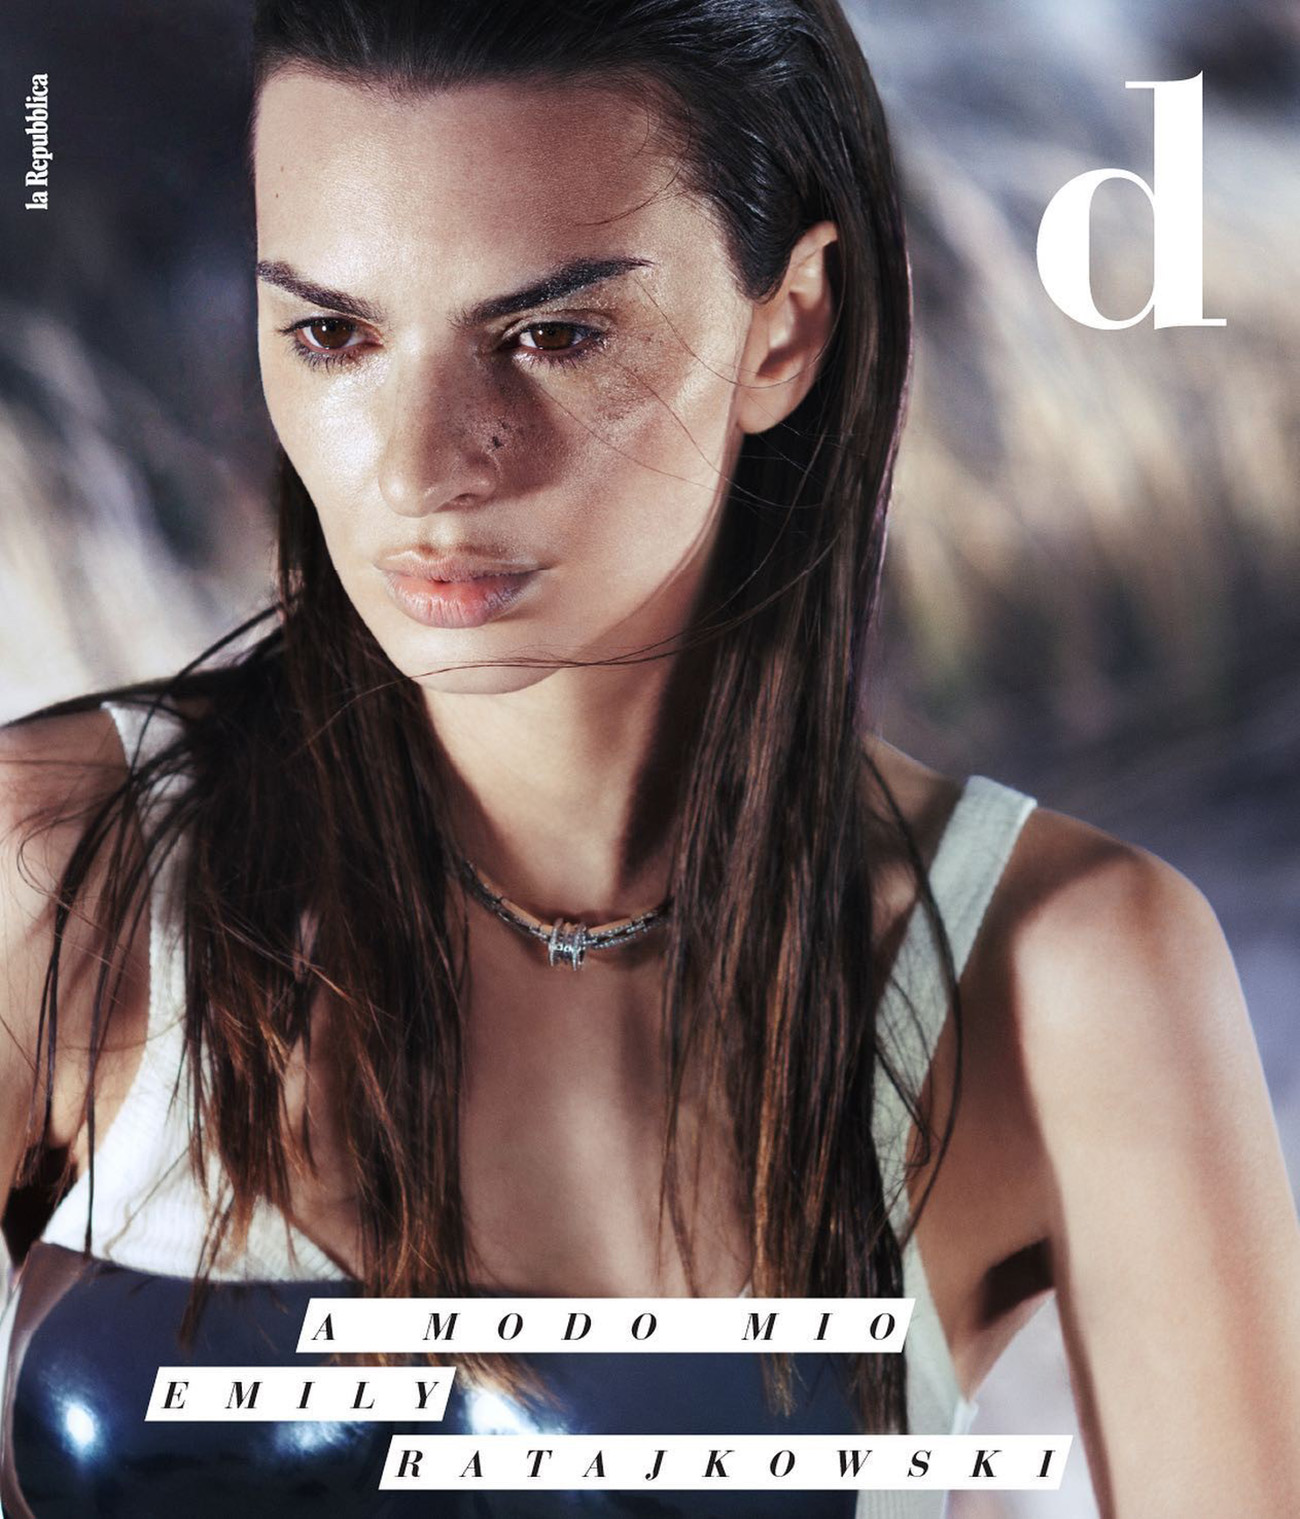 Emily Ratajkowski covers D la Repubblica May 6th, 2023 by Thue Nørgaard